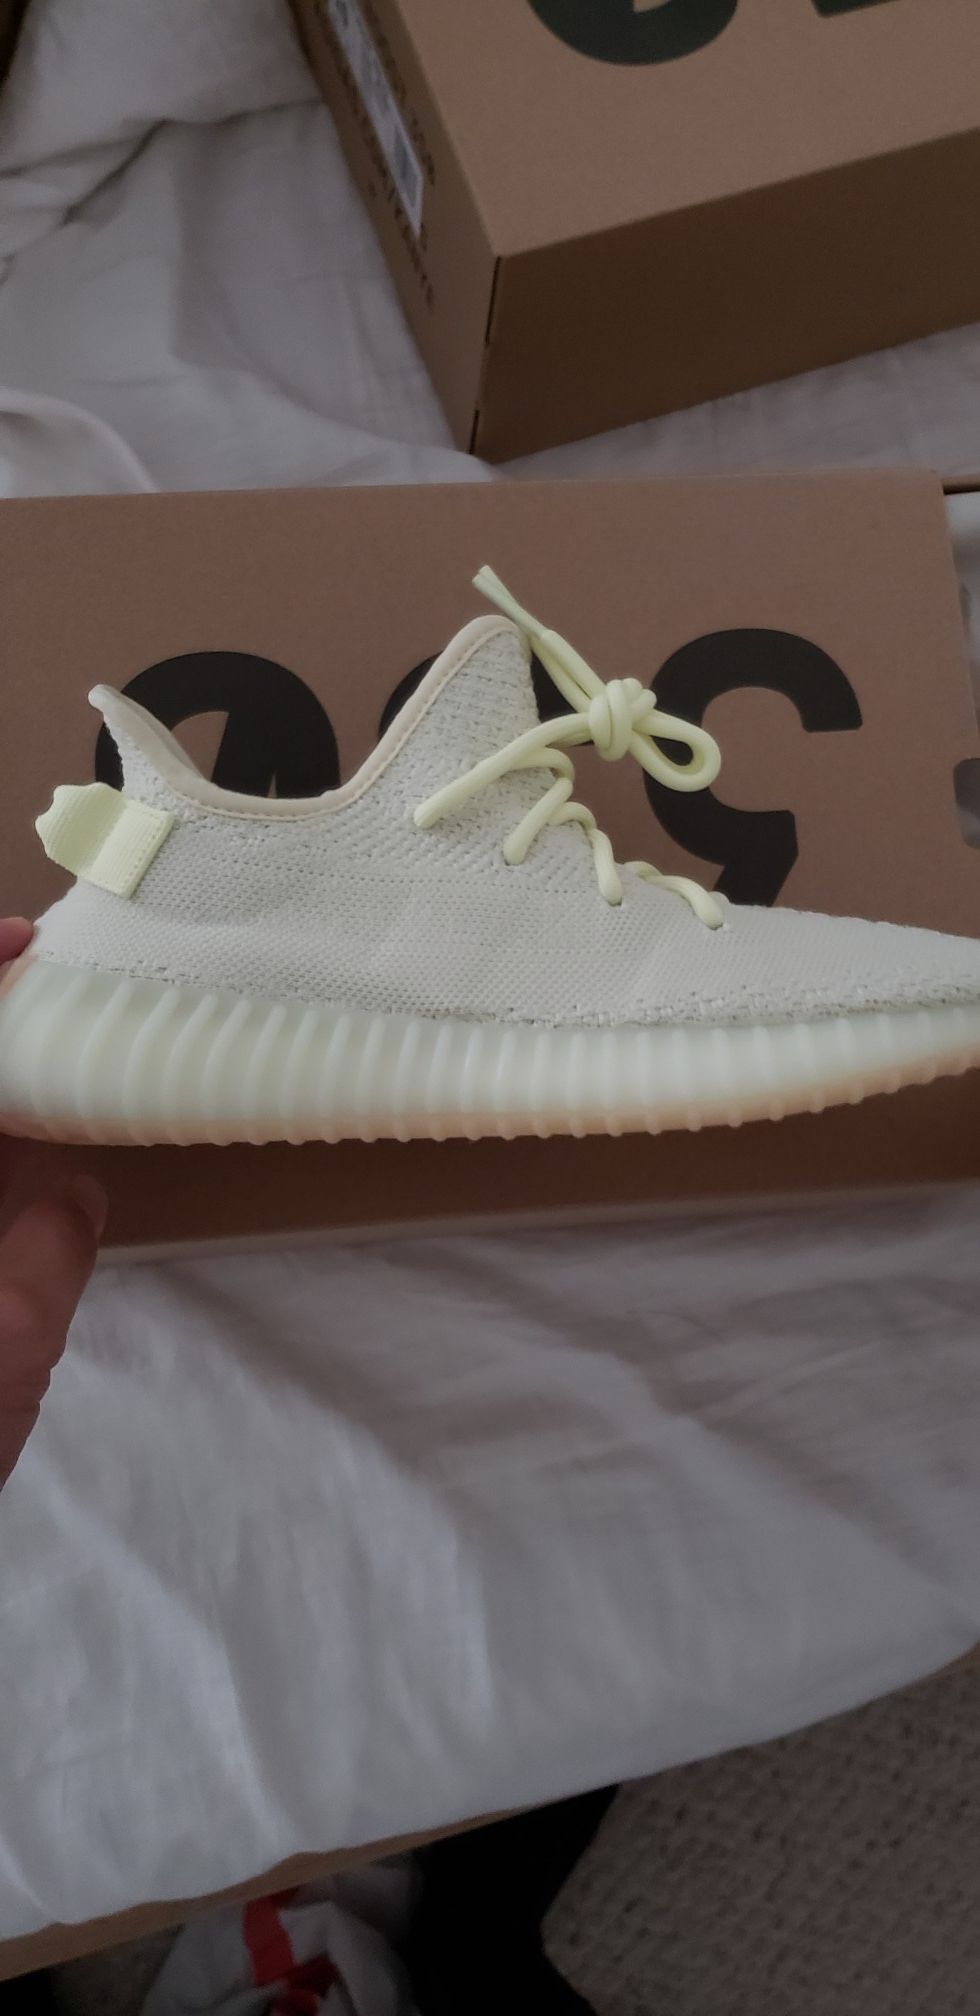 Yeezy 350 butter size 10, 9.5, 8, 7